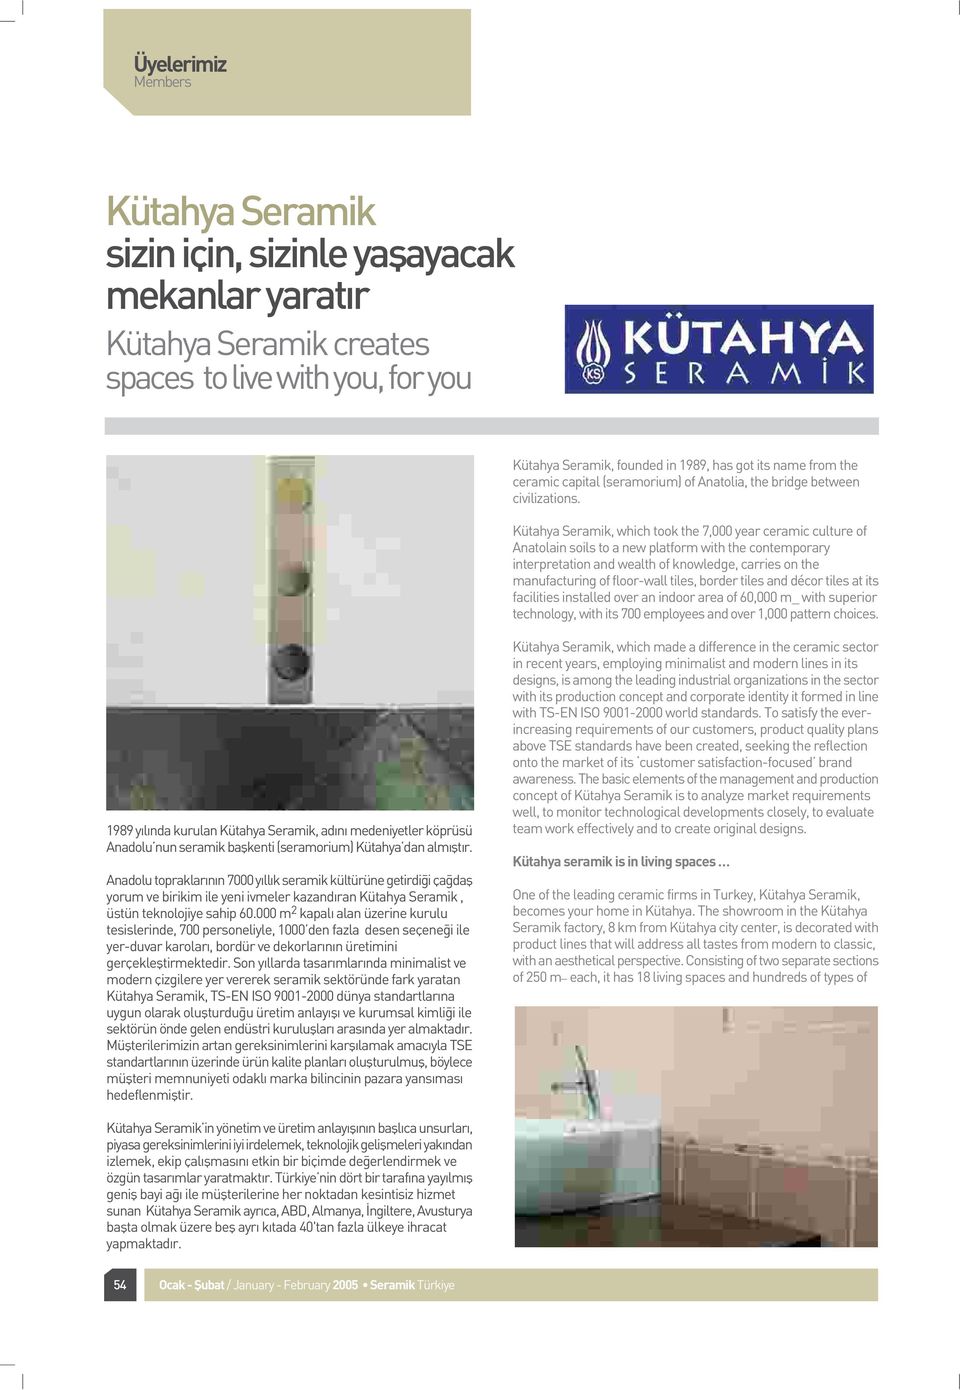 Kütahya Seramik, which took the 7,000 year ceramic culture of Anatolain soils to a new platform with the contemporary interpretation and wealth of knowledge, carries on the manufacturing of